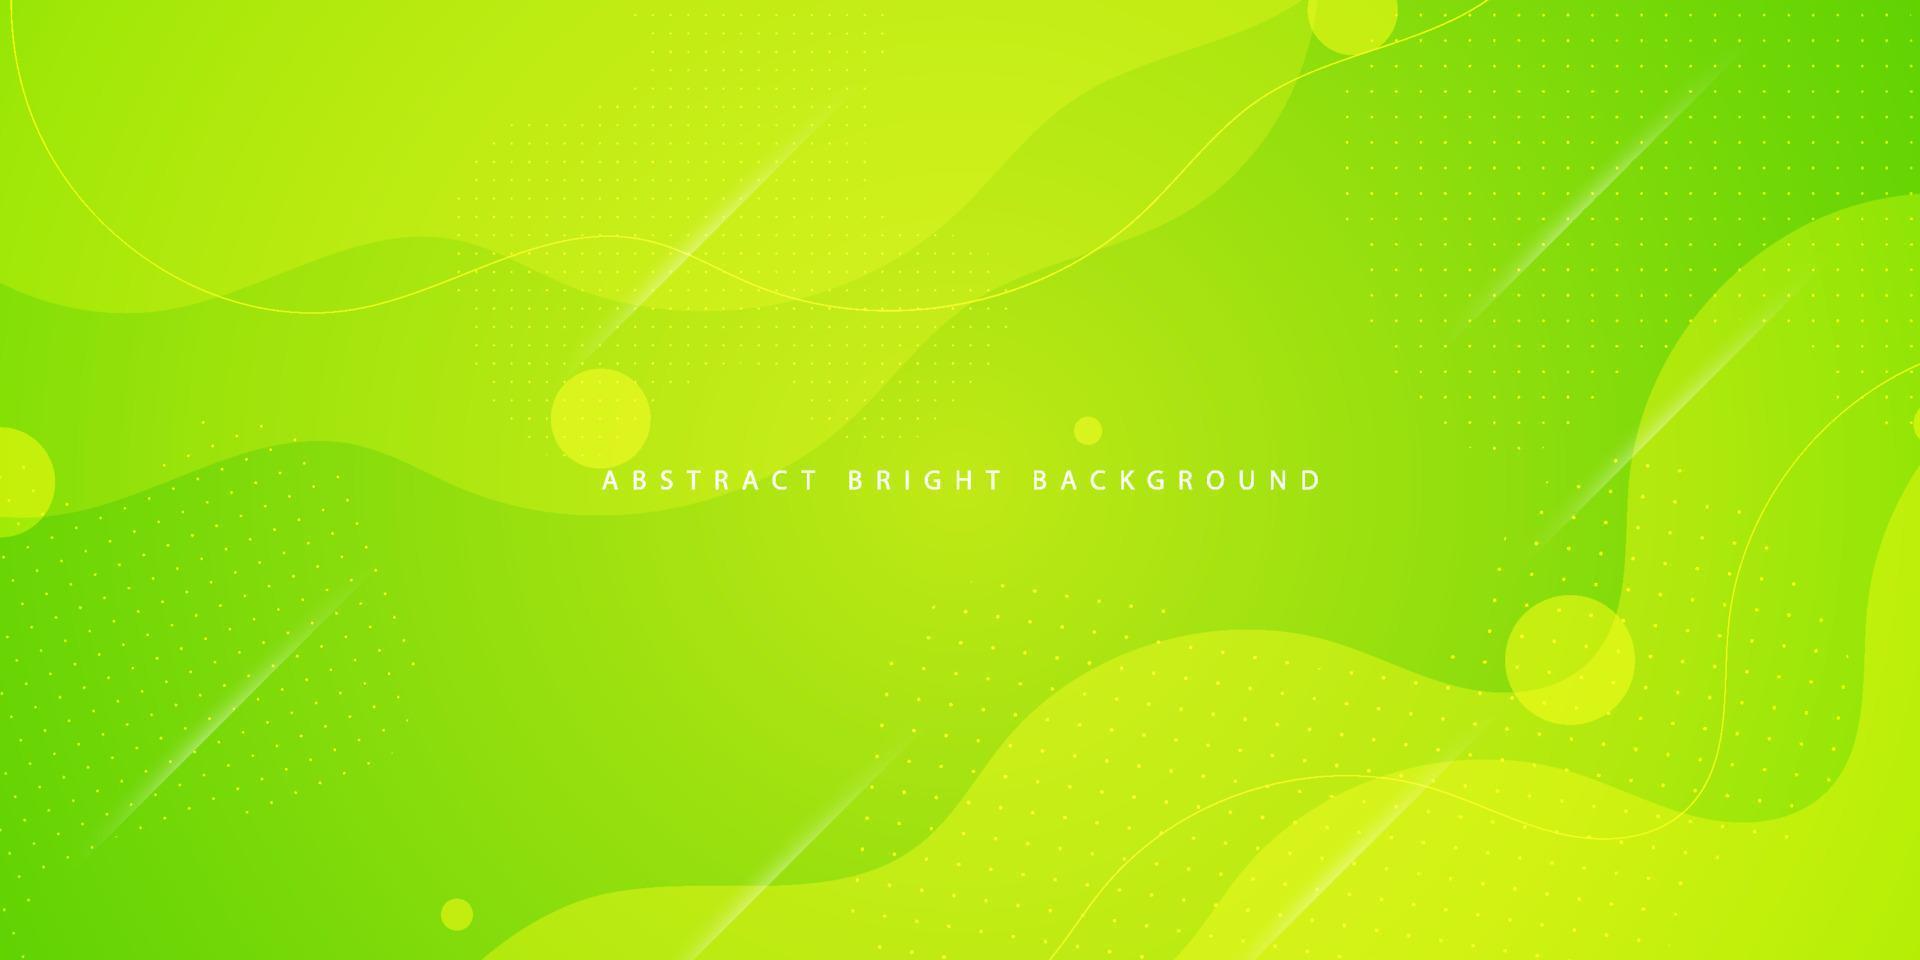 Modern bright green background with simple wave and lines pattern.colorful simple green design.Simple geometric shapes concept. Eps10 vector